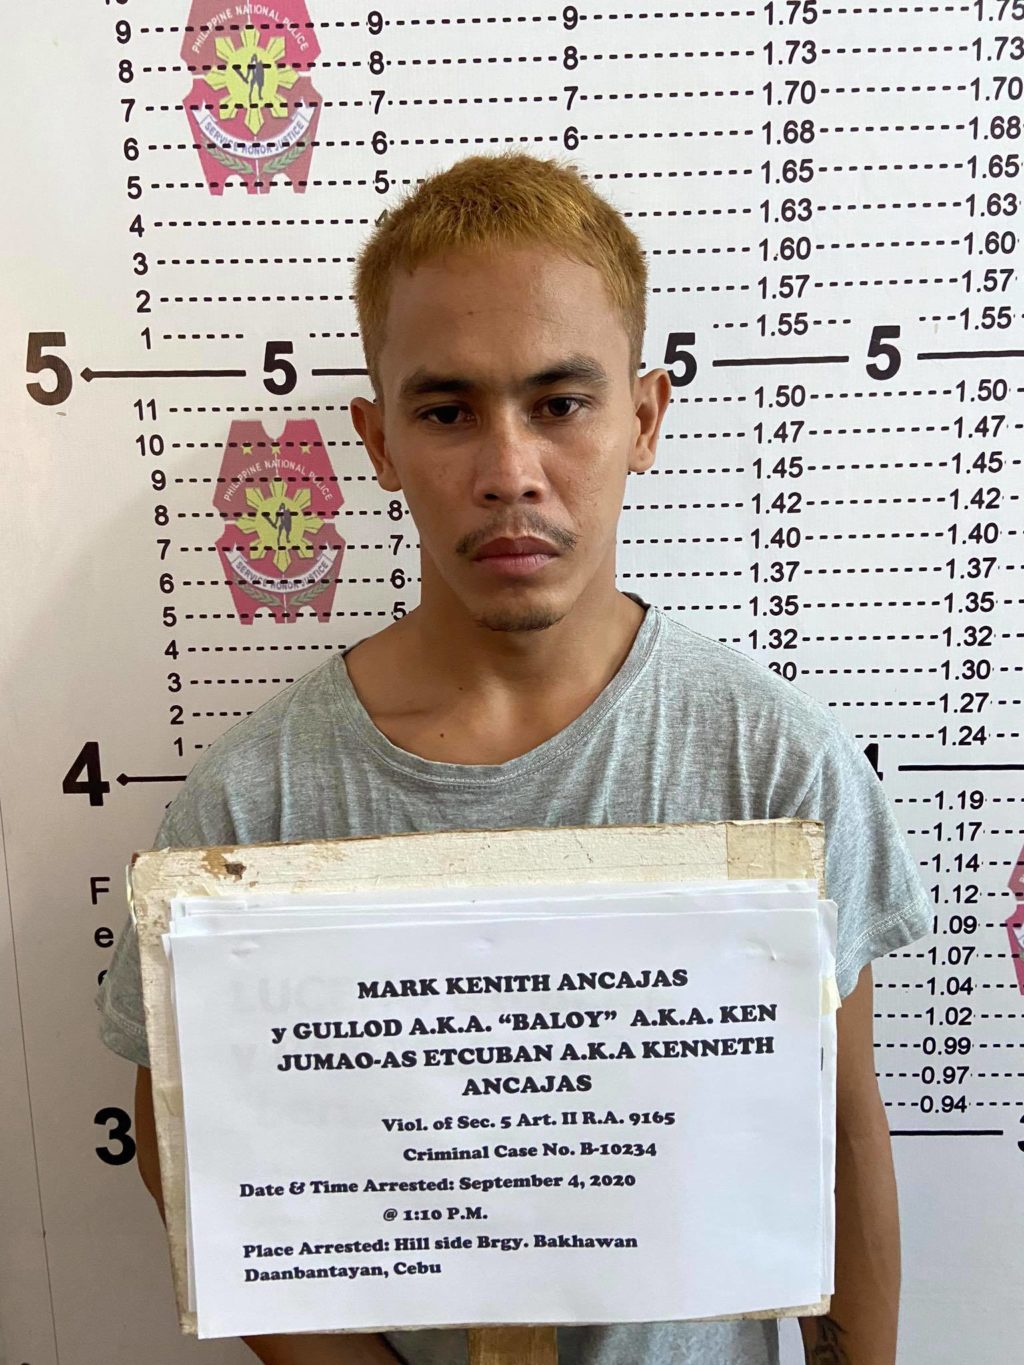 A 24-year-old fisherman with a standing warrant for selling of illegal drugs was arrested by the police in Daanbantayan today, September 4, 2020. | Photo from CPPO